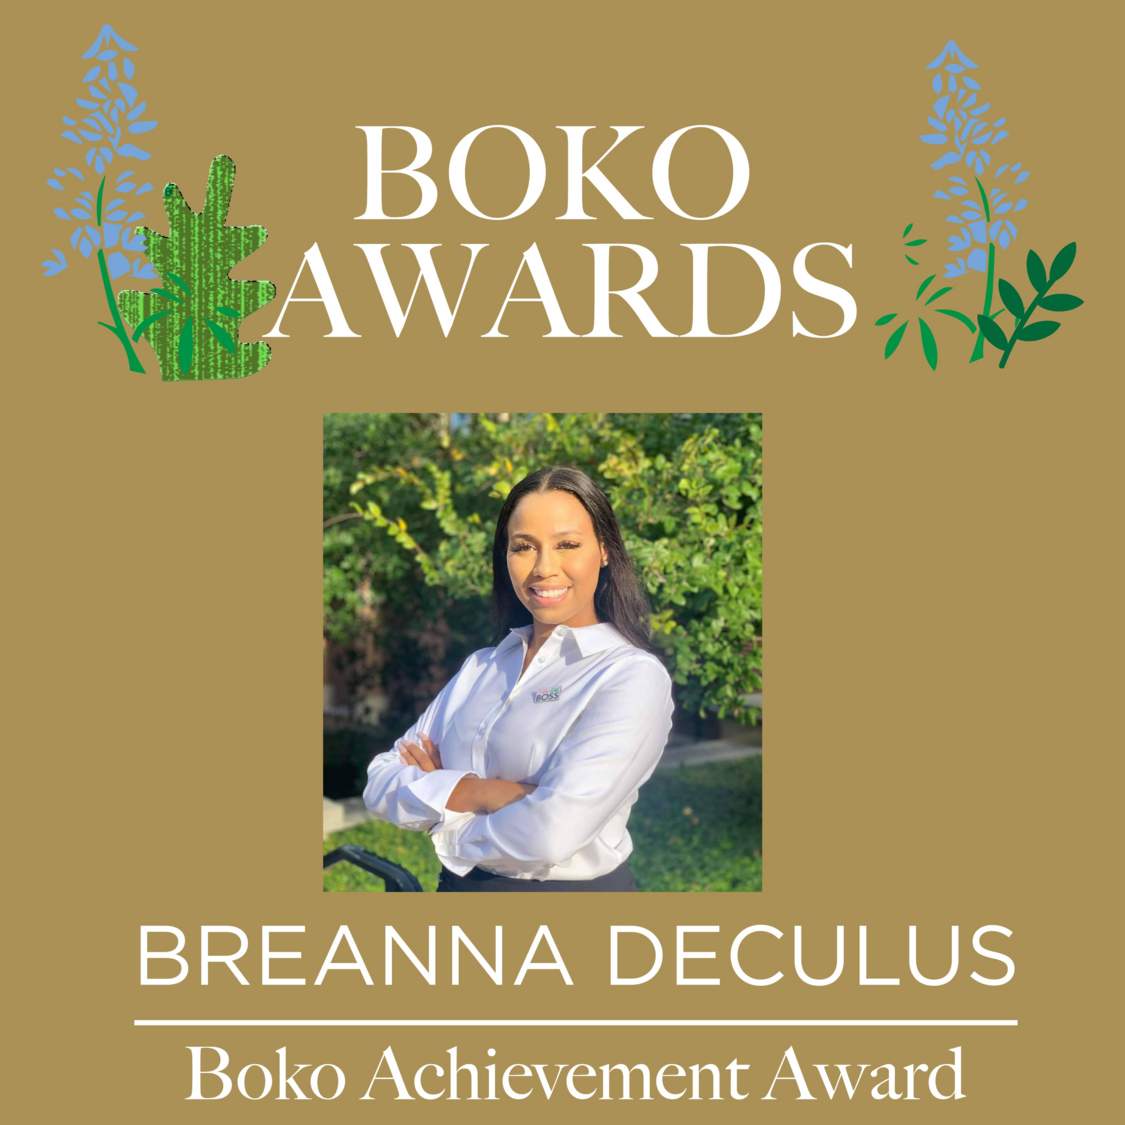 Picture of text displaying that Breanna Deculus won the Boko Lifetime Achievement award.